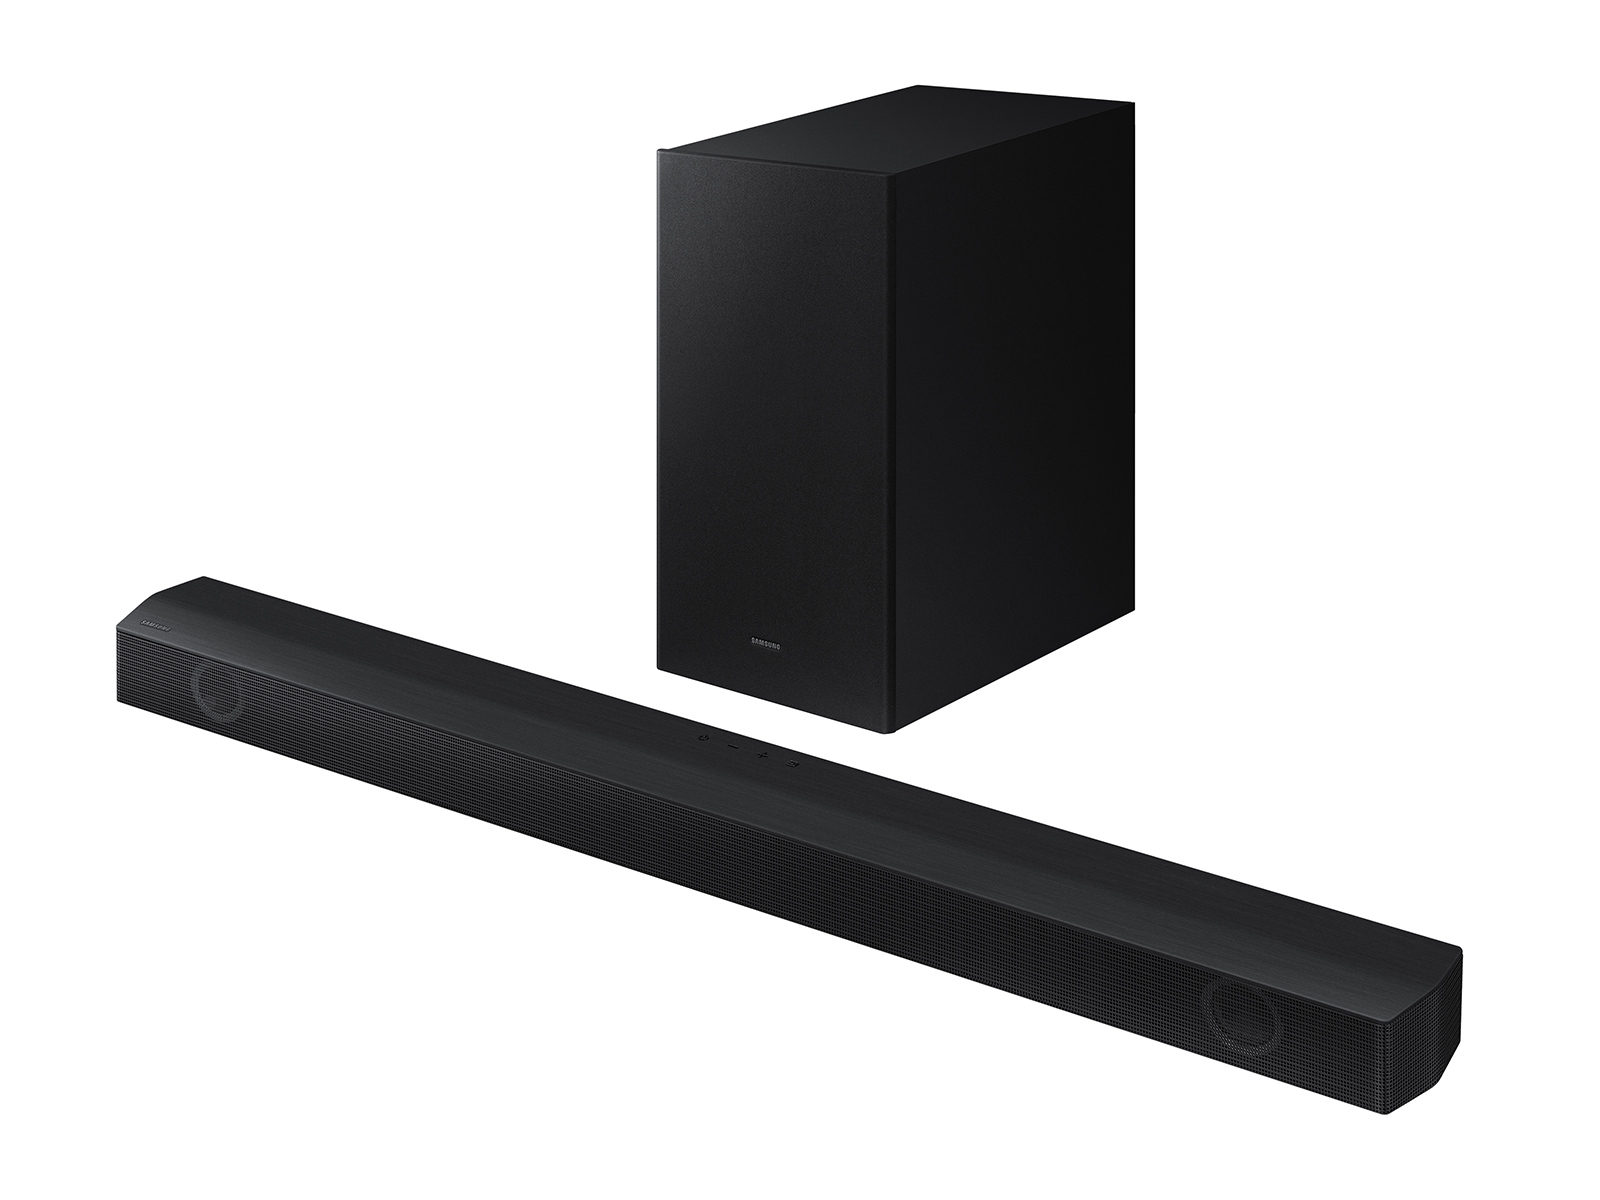 https://image-us.samsung.com/SamsungUS/home/television-home-theater/home-theater/sound-bars/9192022/hw-b550-za/HW-B550_002_Set-R-Perspective_Black-Gallery-1600x1200.jpg?$product-details-jpg$